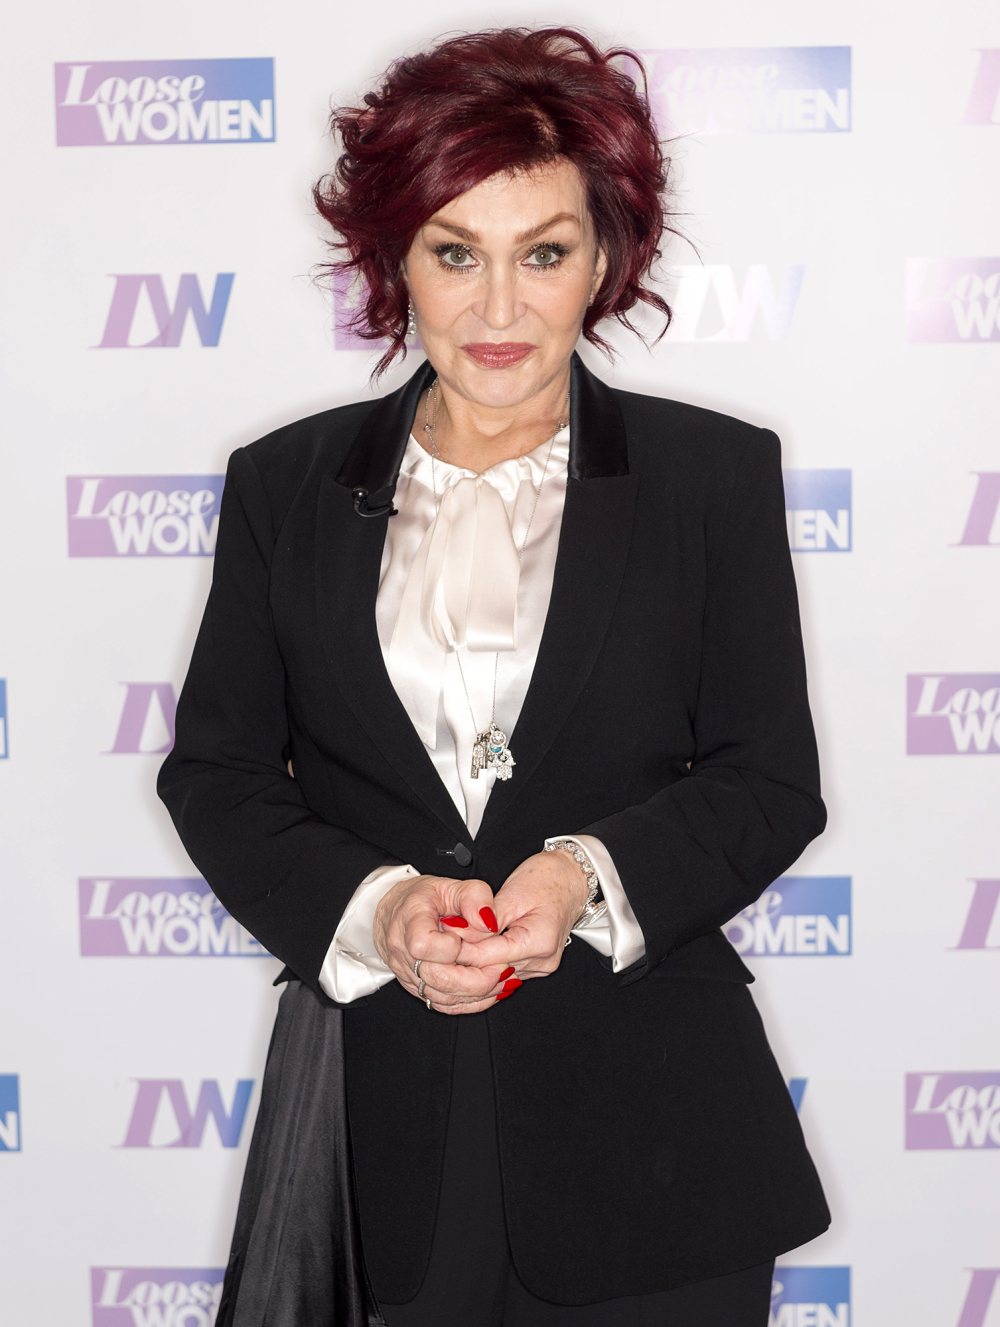 Sharon Osbourne Breaks Her Silence on Leaving 'The Talk' After Racially Insensitive Comments